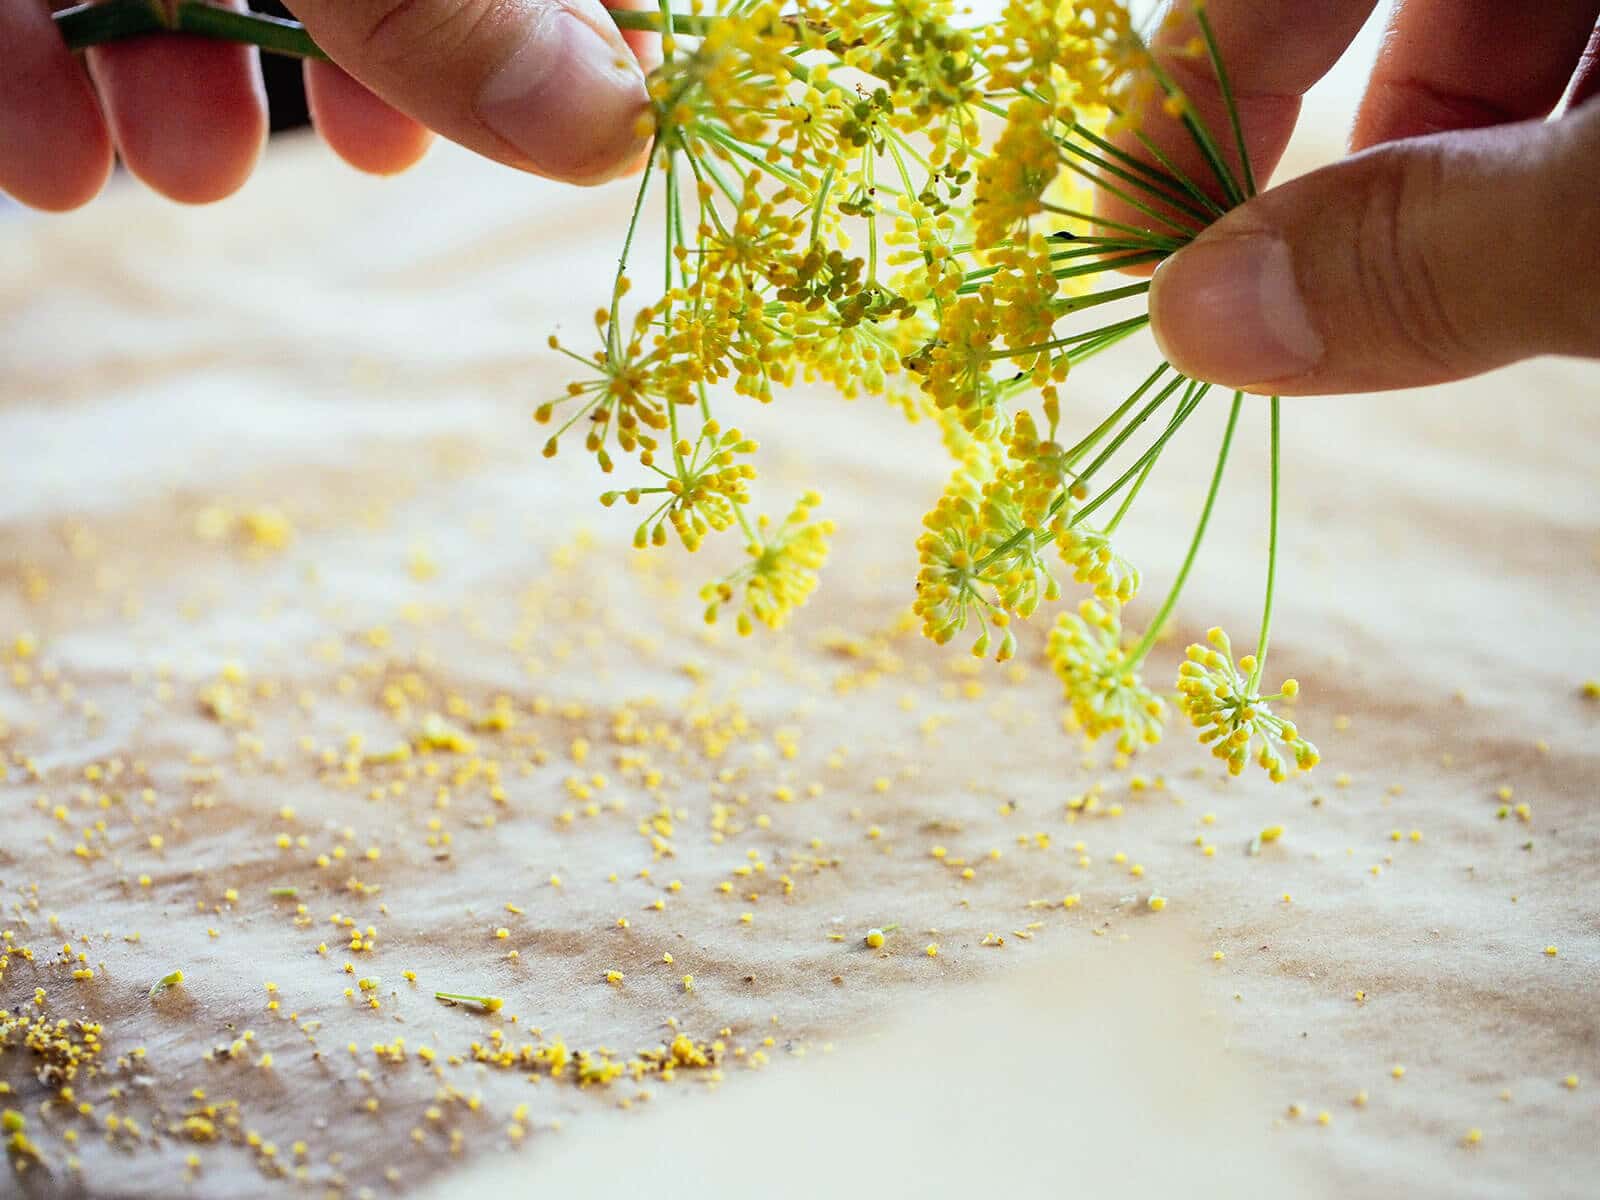 Two hands rubbing fennel flower heads together with fallen pollen grains on parchment paper